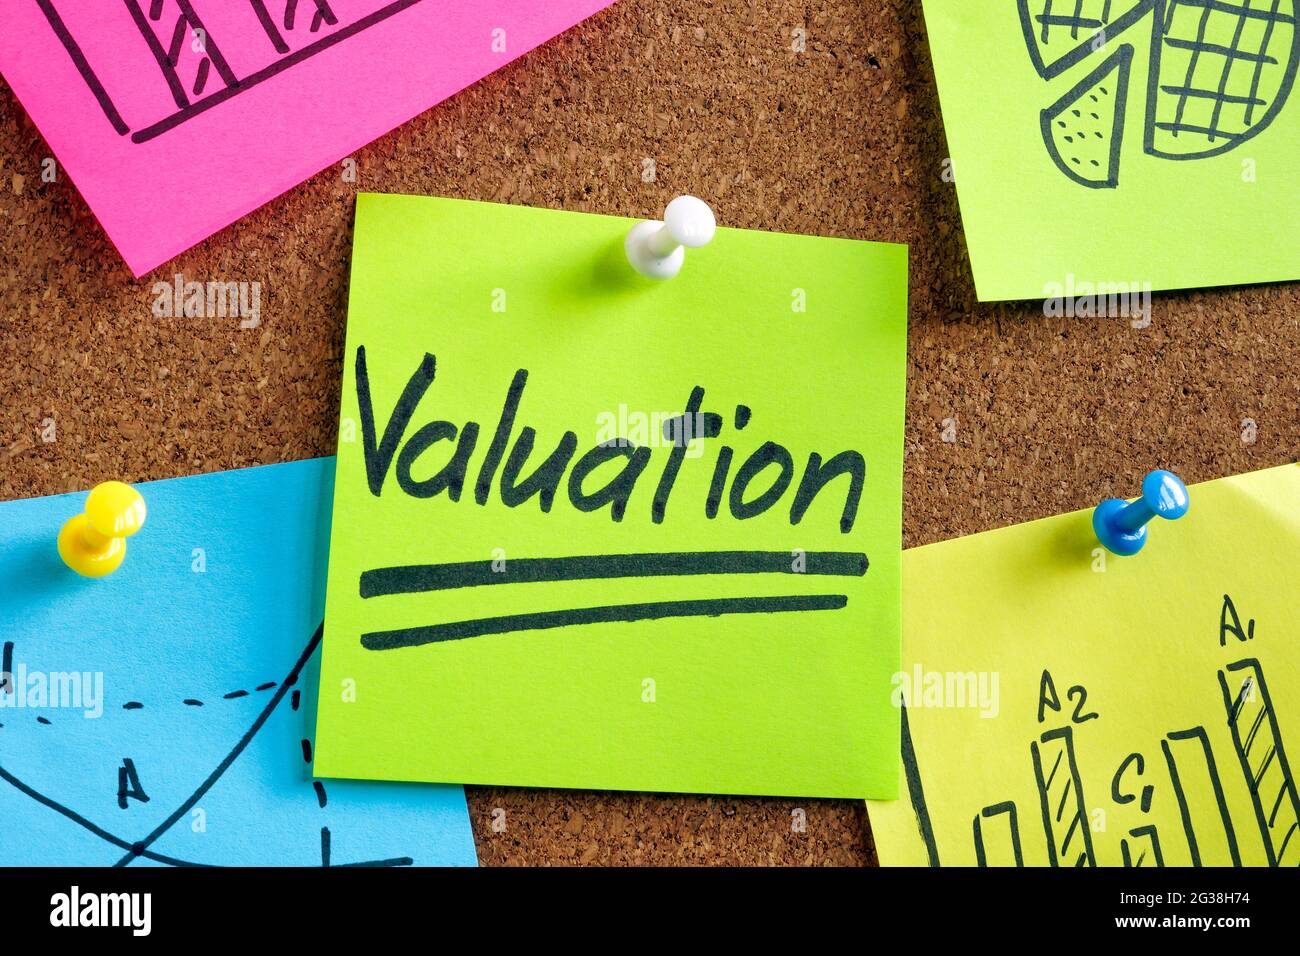 Valuation word on the sticker pinned to the desk. Stock Photo